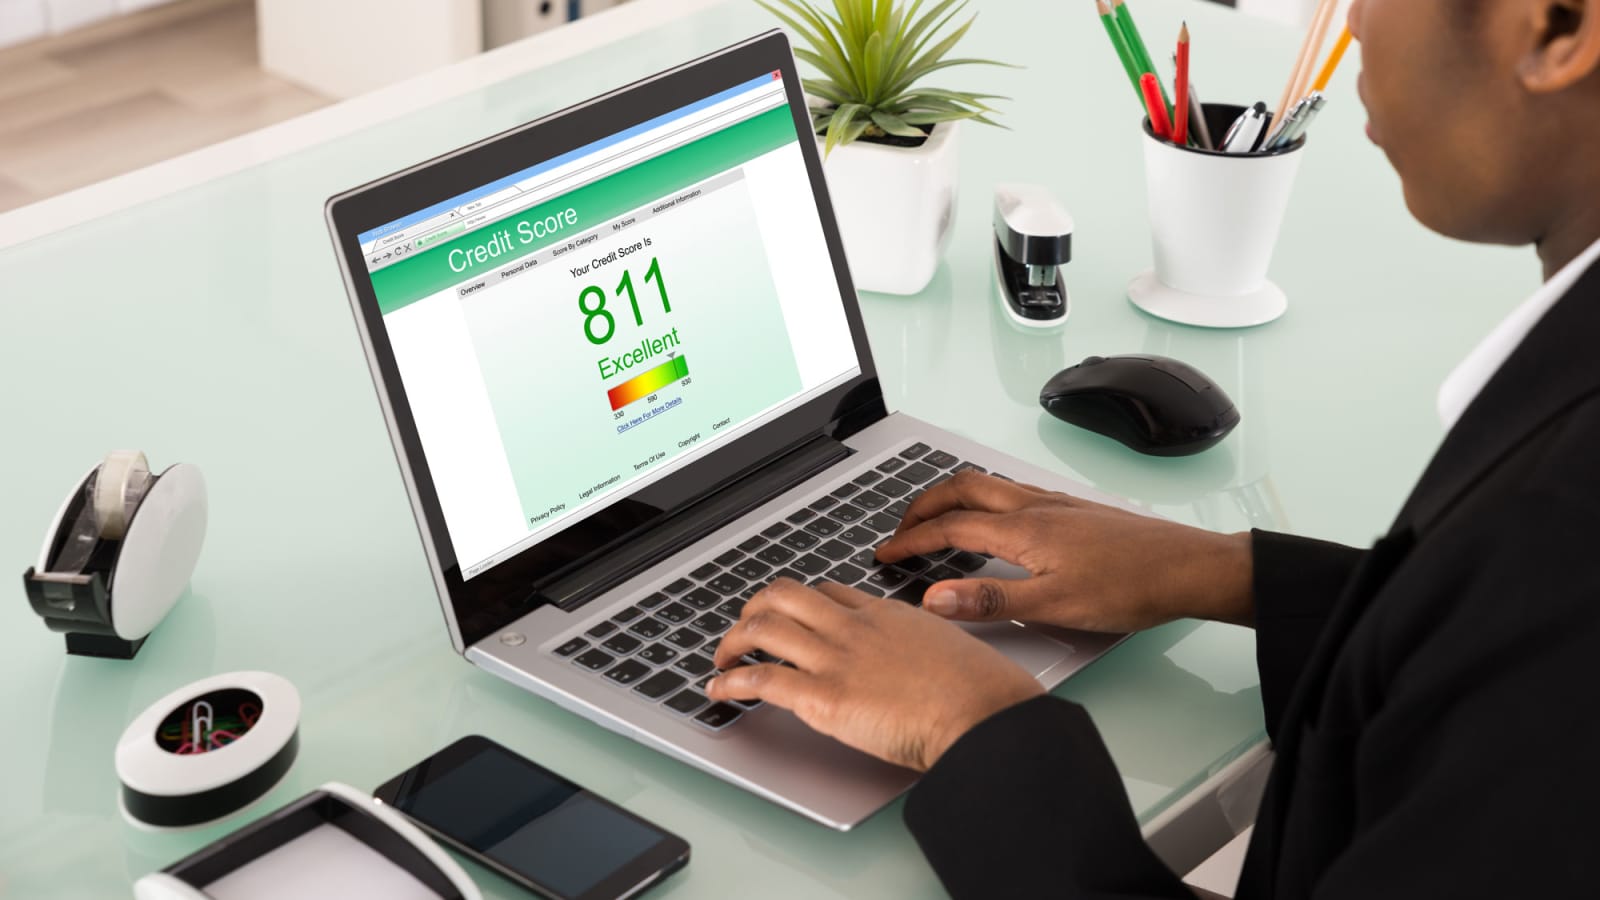 Free Credit Scores: Find What's Impacting Your Credit